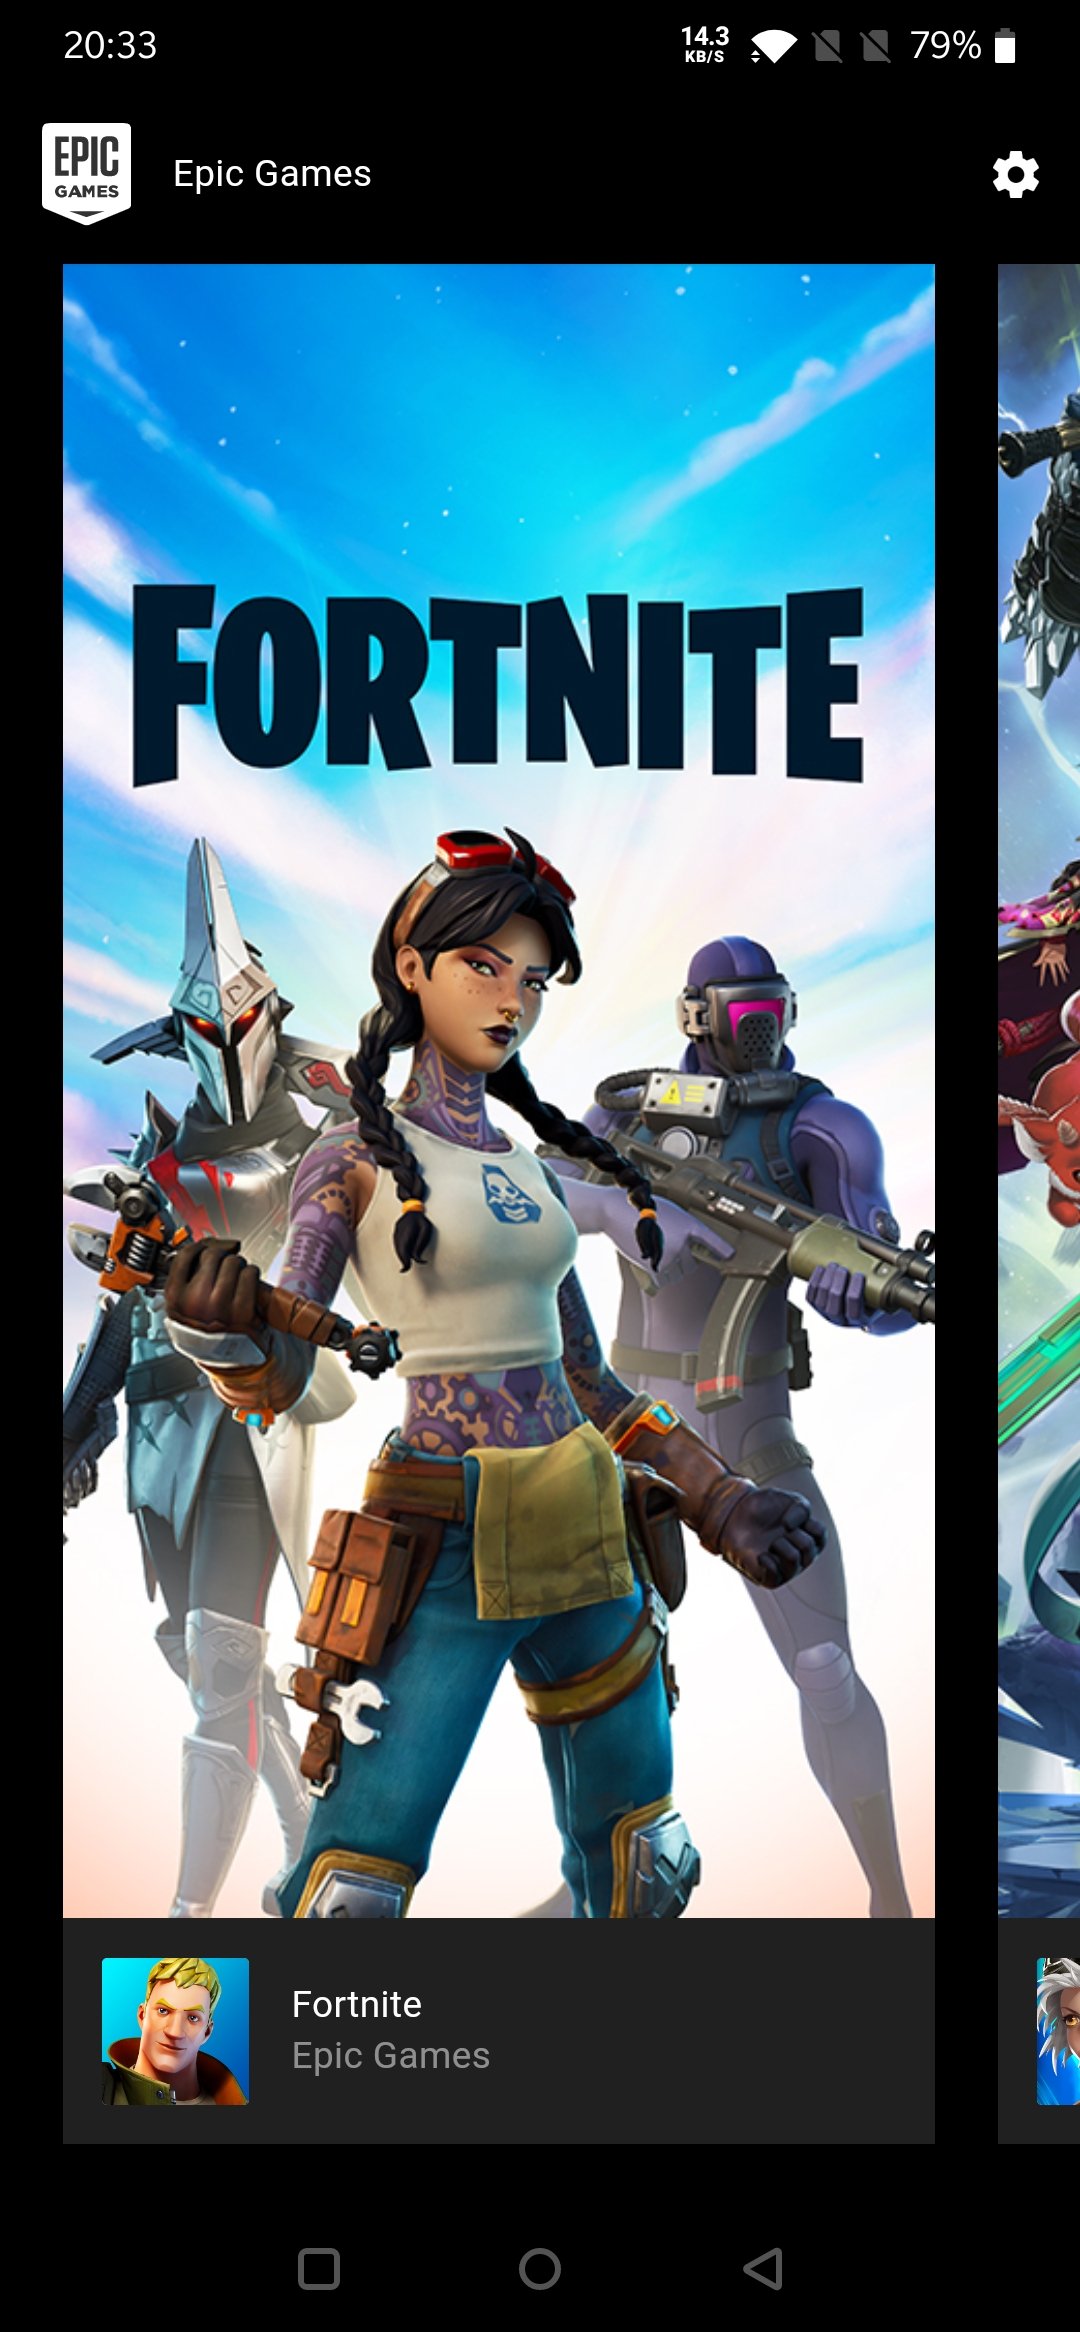 You can still install Fortnite on Android; here's how